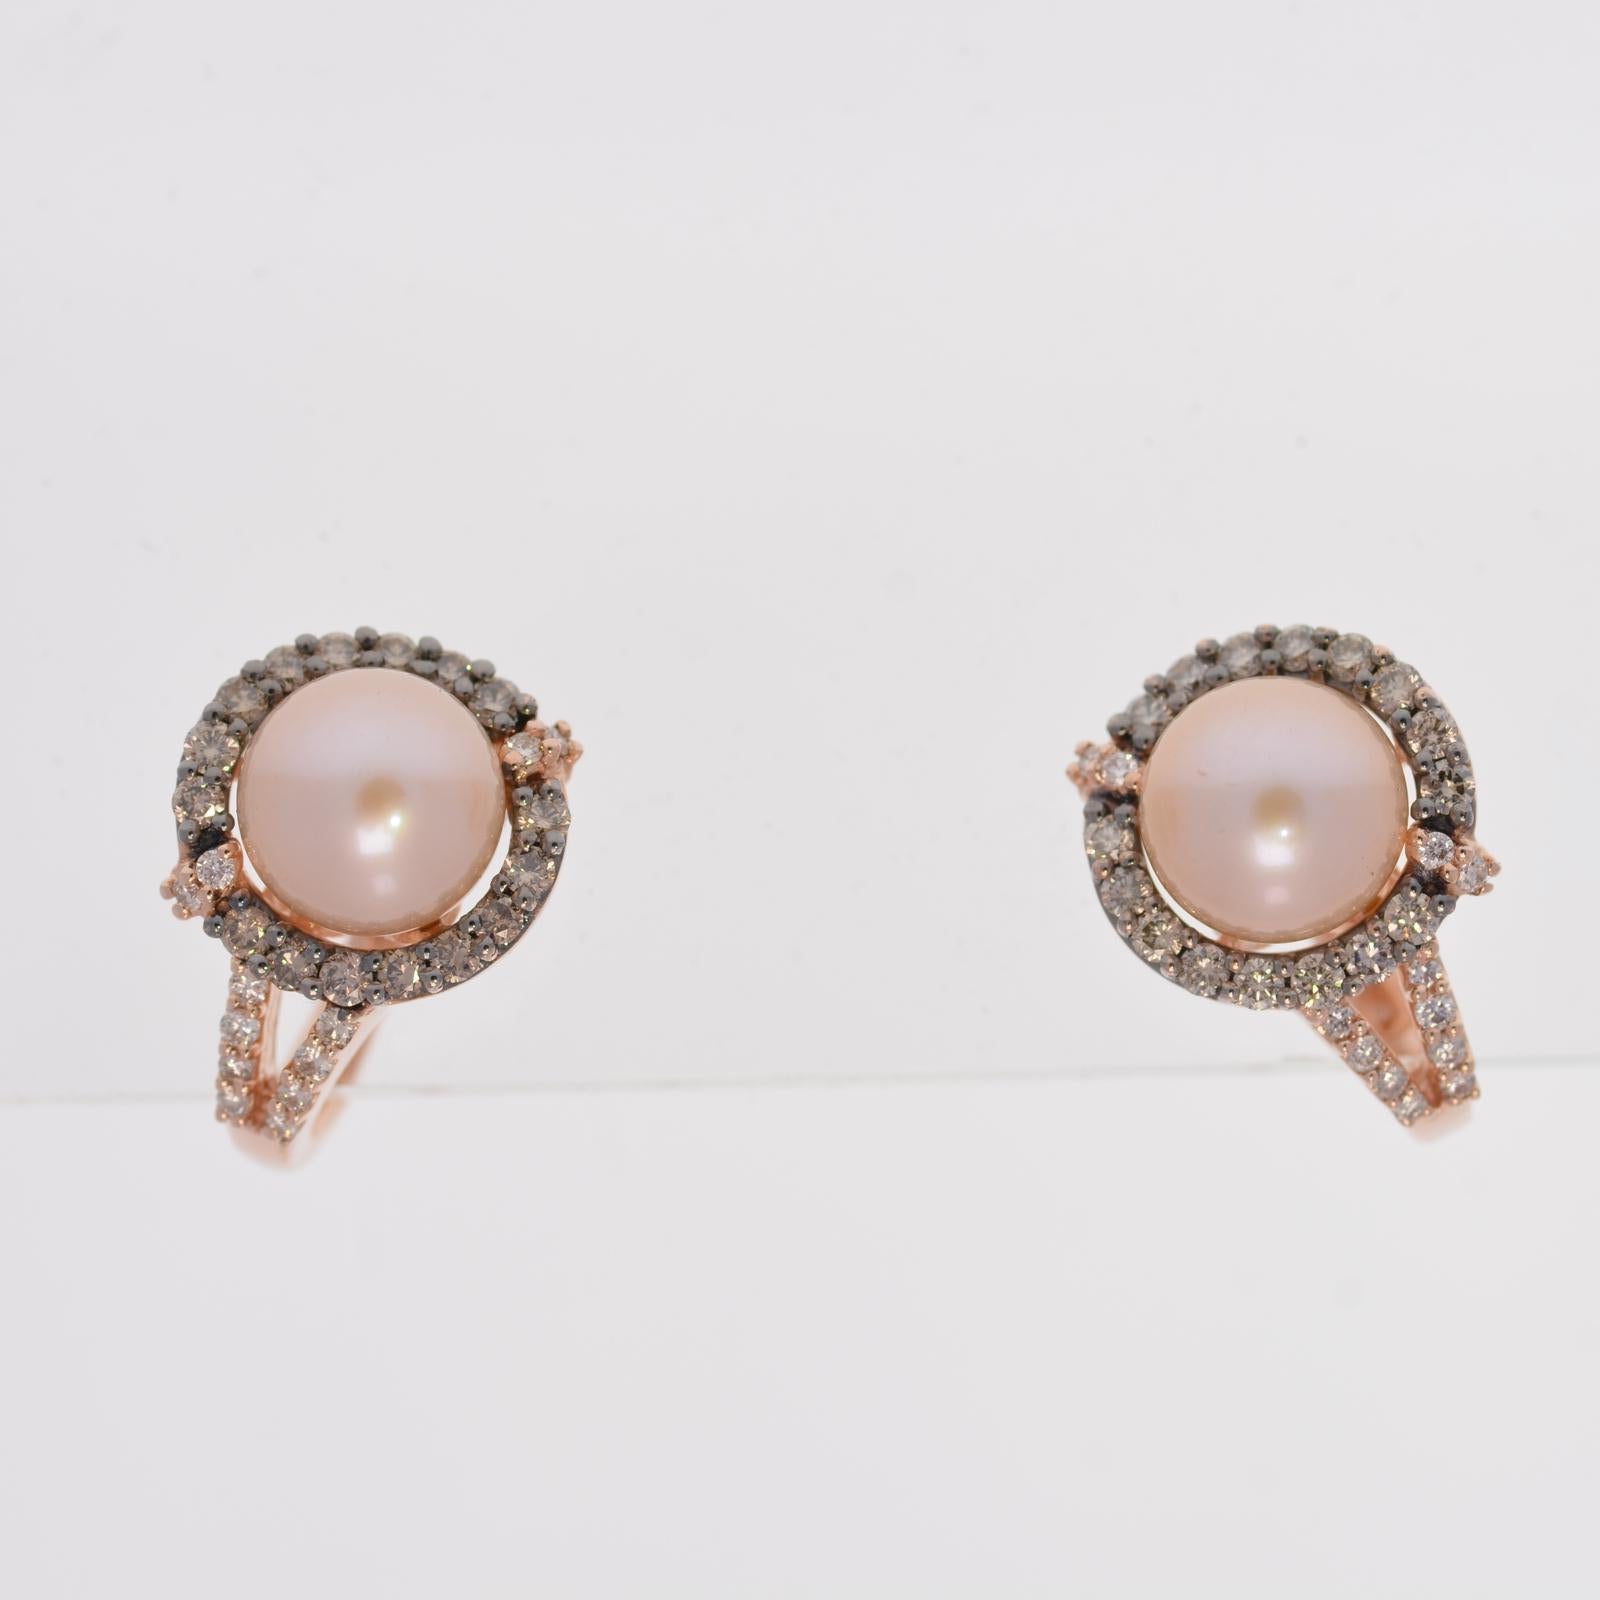 Levian Estate Diamond and Pearl 14k Rose Gold Earrings

Metal Type:
Rose Gold
Metal Purity:​​​​​​​
14k
Main Stone Creation:
Natural
Total Carat Weight:
.72
Main Stone:
Fresh Water Pearls
Gender: 
Women's

Replacement Value: $2450.00
JESSUP’S PRICE: